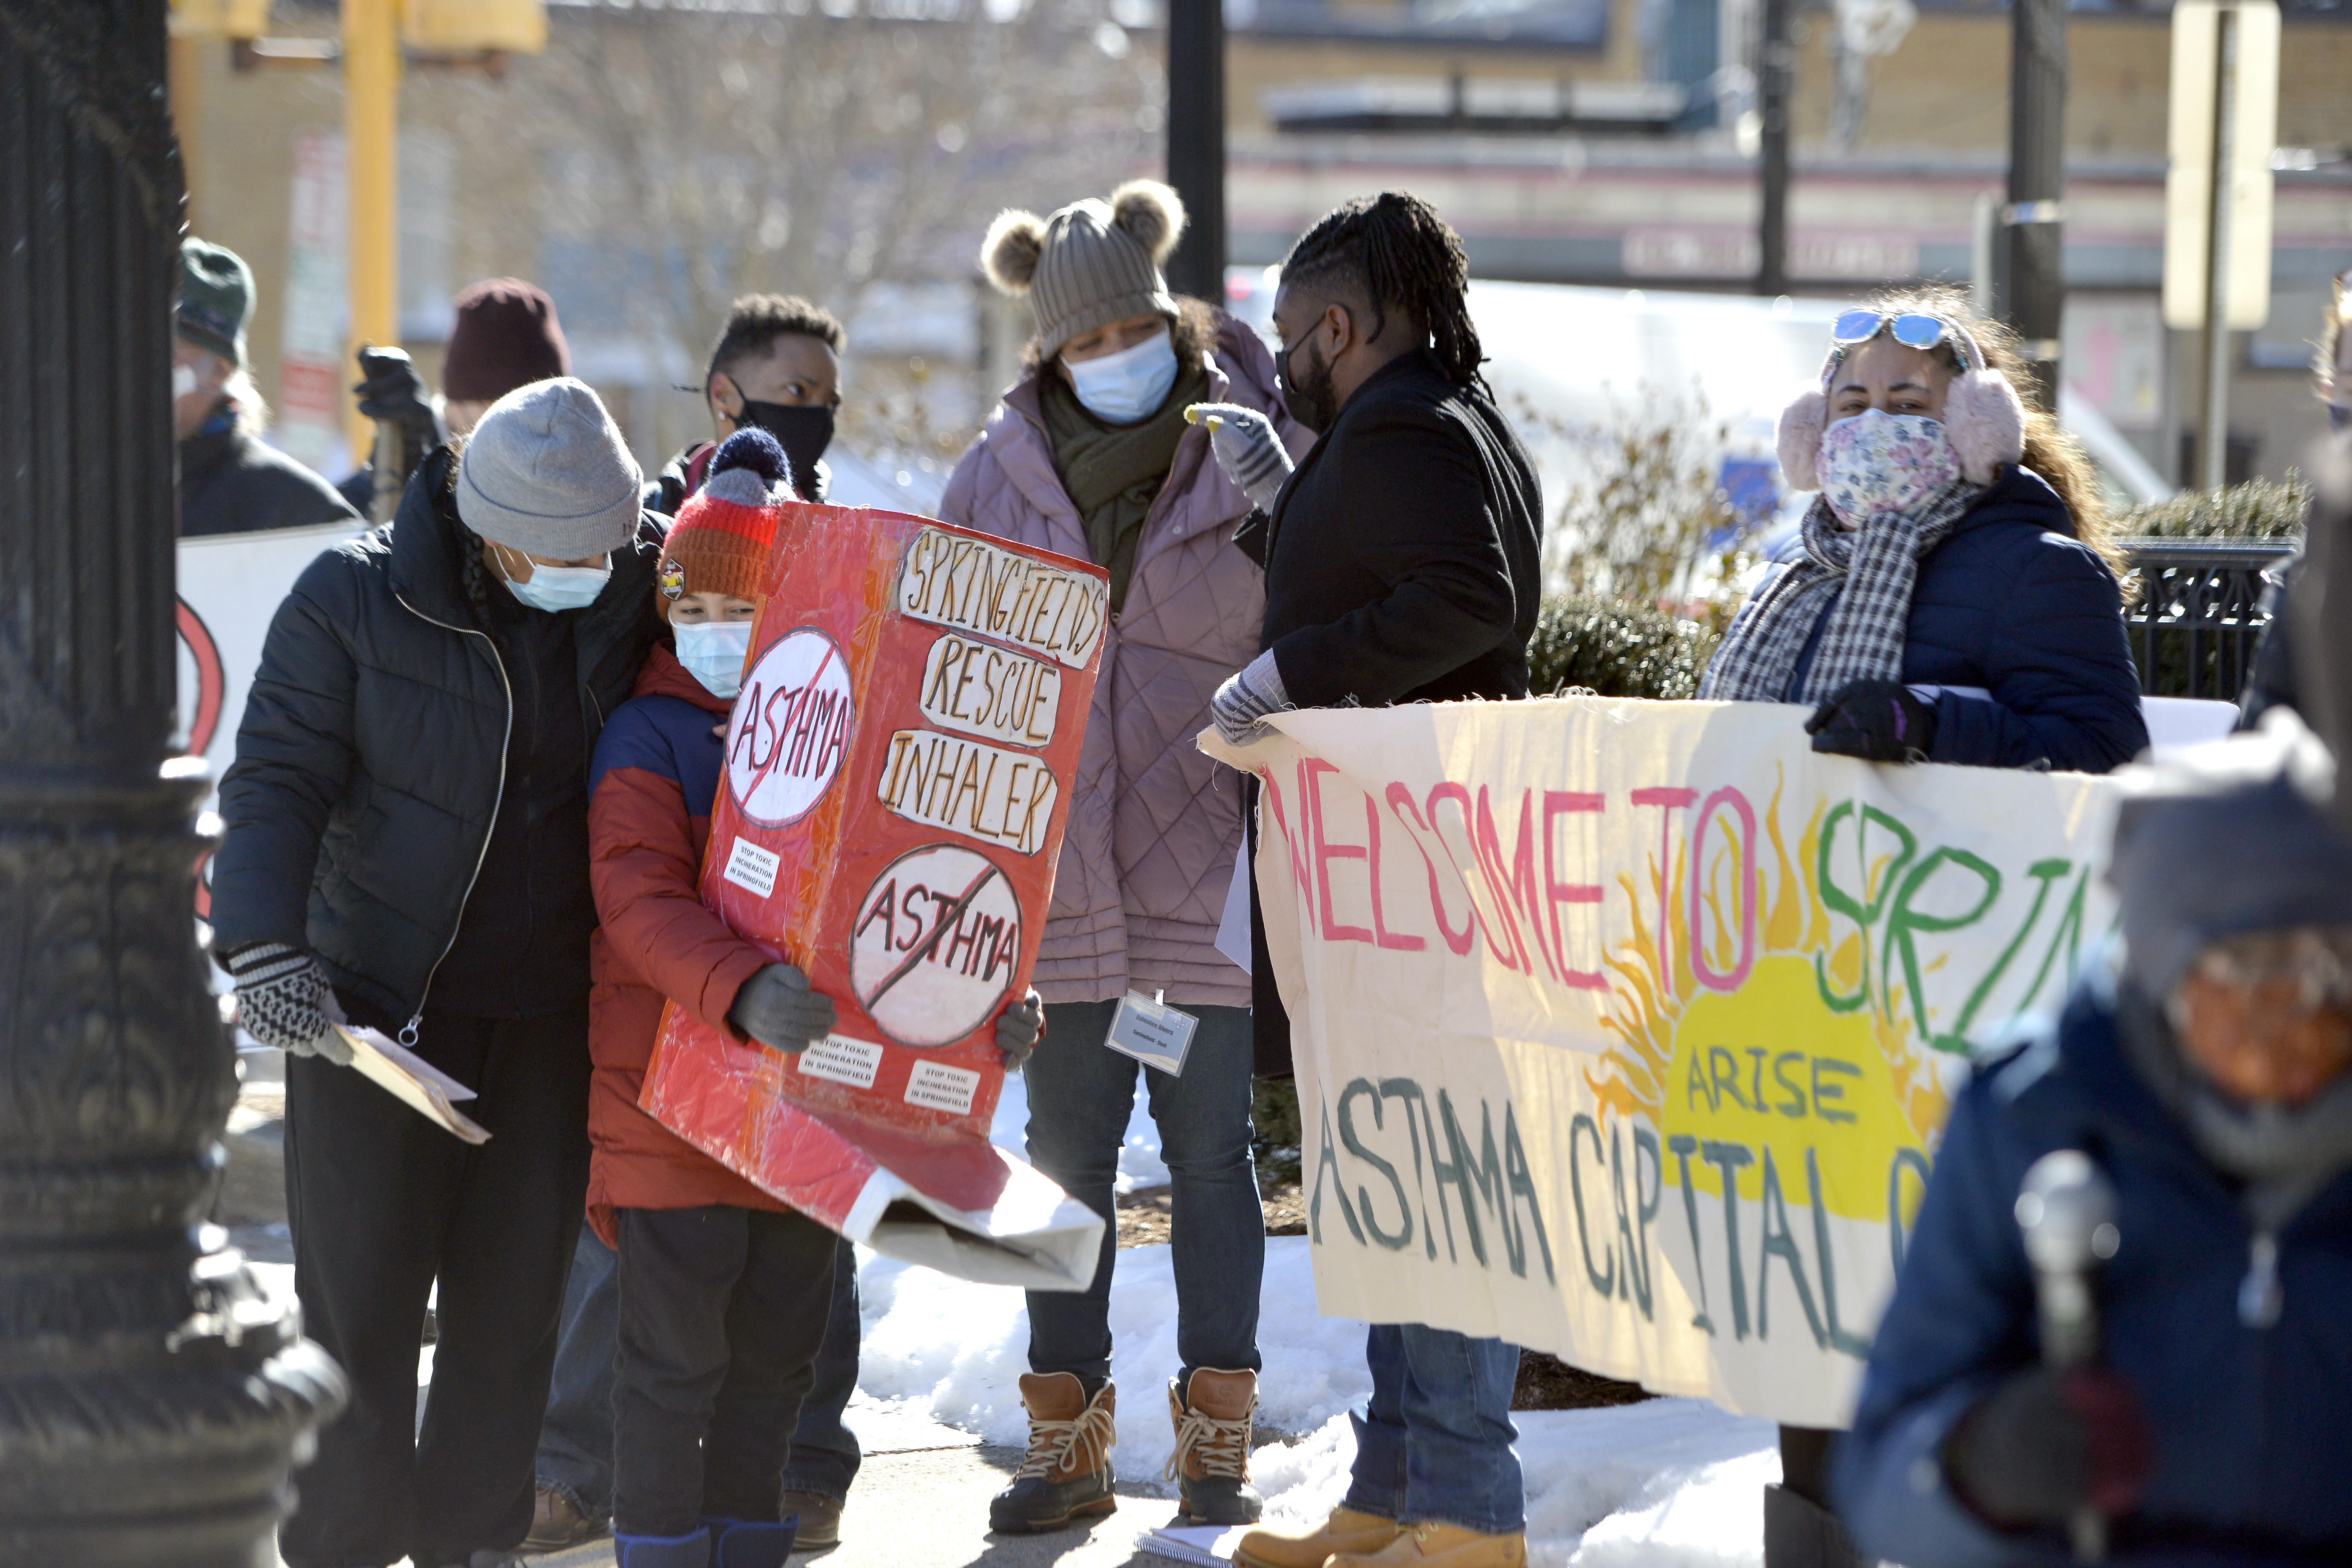 Demonstrators stand outside the Western Massachusetts office of Governor Charlie Baker in Springfield to demand an end to the long proposed biomass energy plant in East Springfield on Feb. 17, 2021.   (Don Treeger / The Republican)